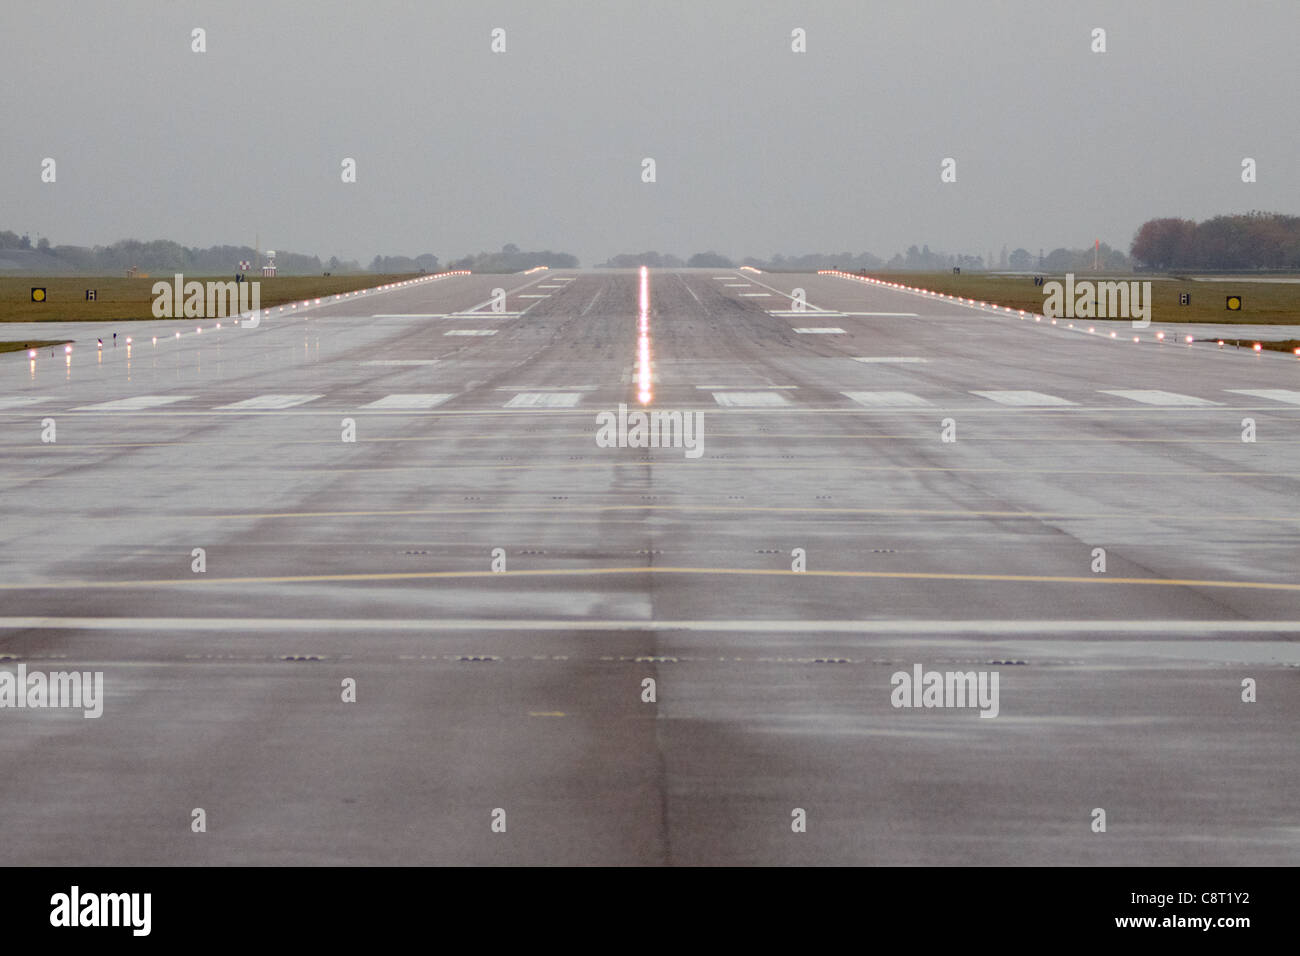 General view of RAF Brize Norton runway and airfield Stock Photo